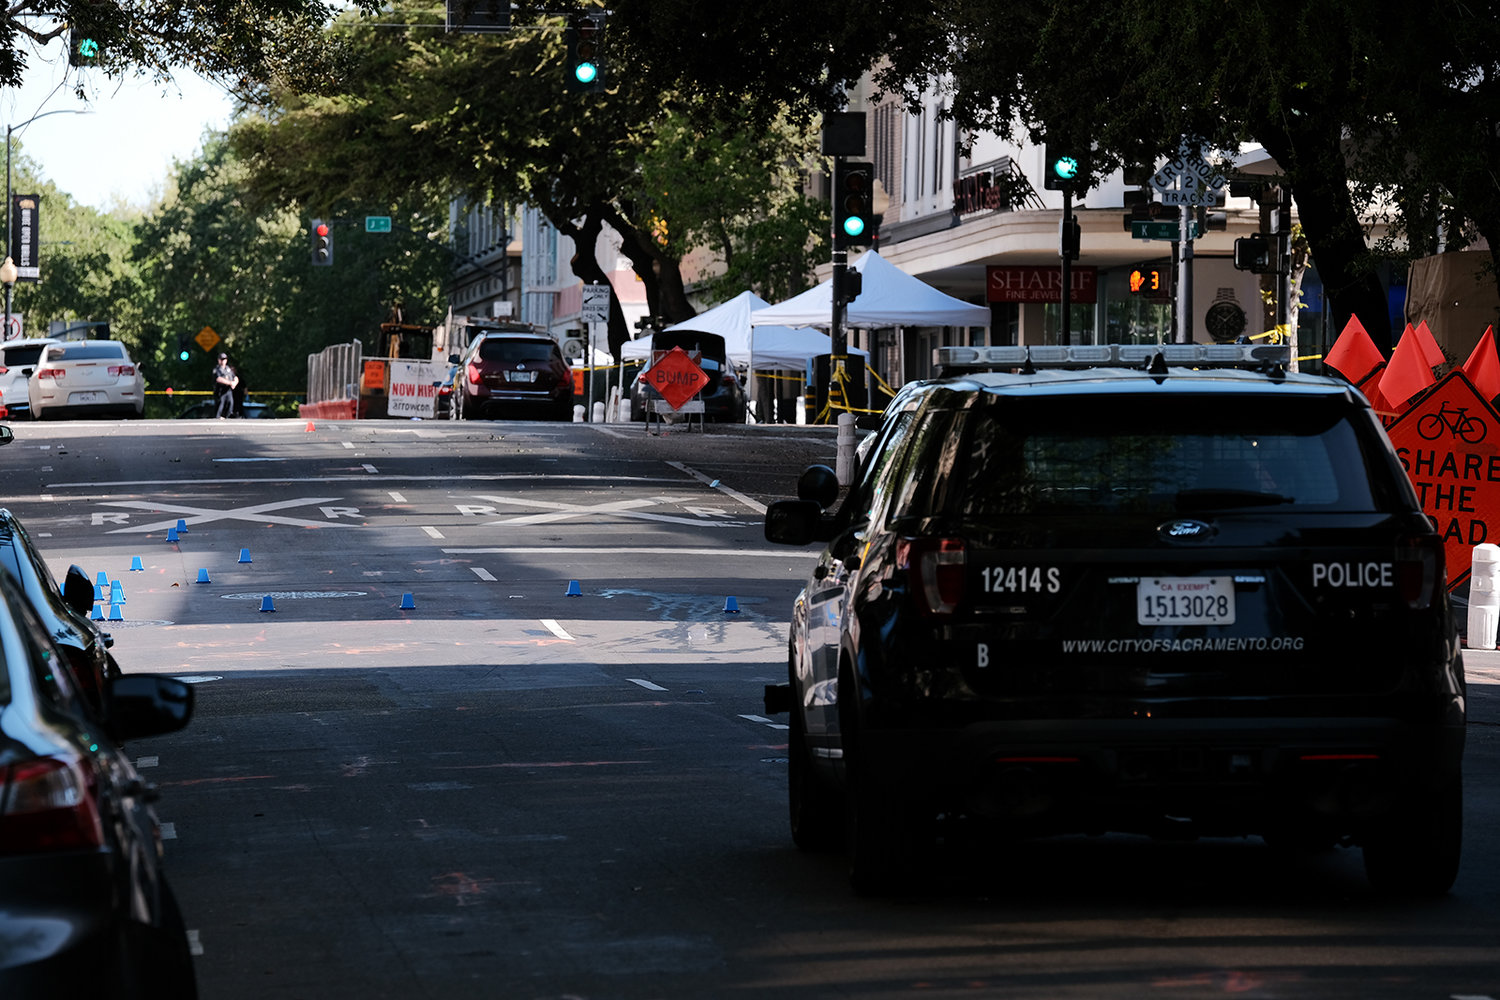 Police markers are placed in the street on the corner of 10th and L streets at the scene of a shooting that occurred in the early morning hours on April 3, 2022, in Sacramento, California. Six people were killed and 12 were injured. (David Odisho/Getty Images/TNS)